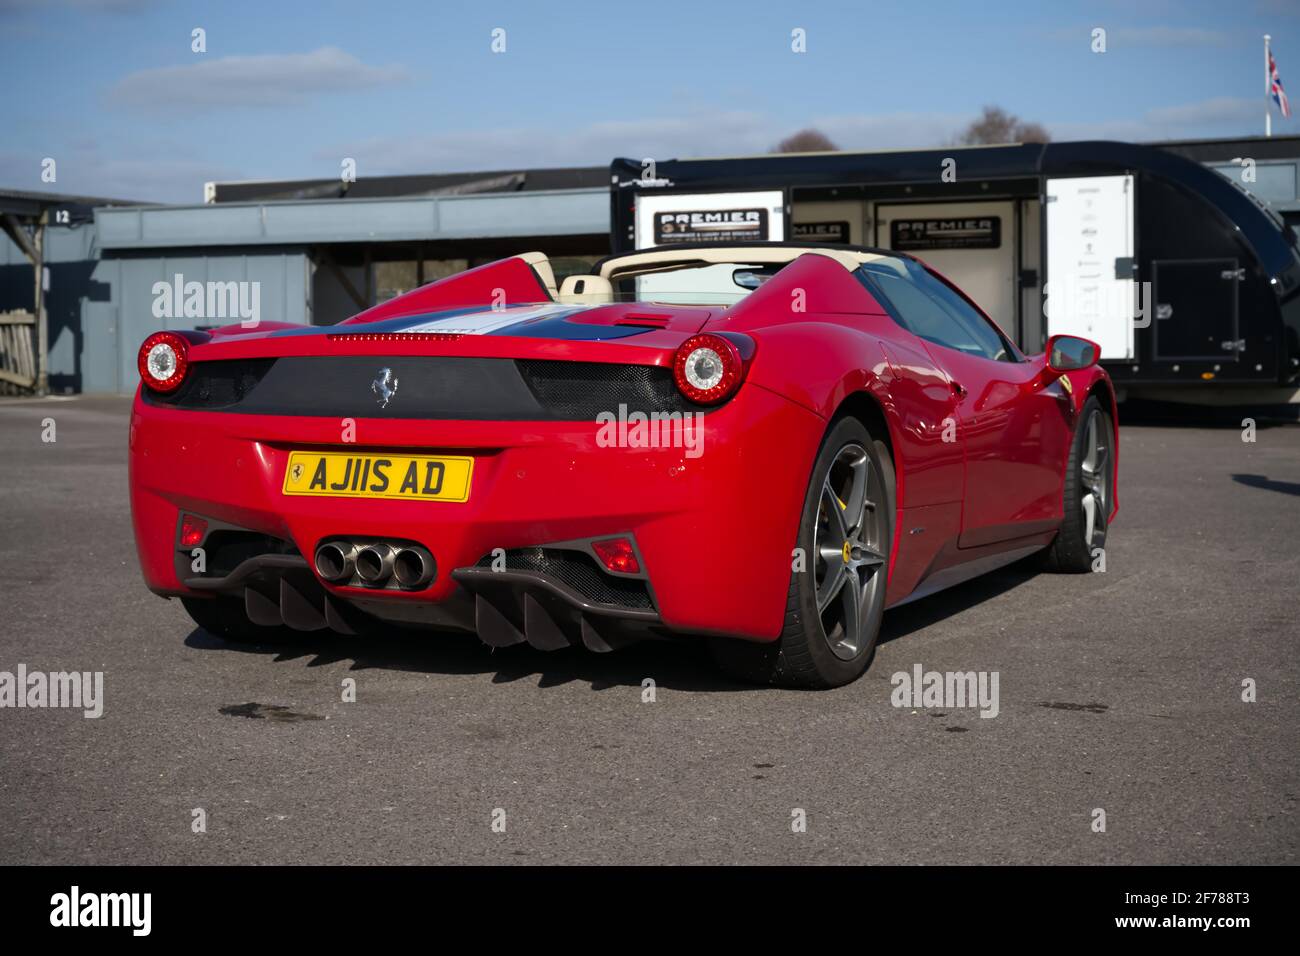 A Ferrari 458 Spider supercar in classic red parked at a track day meeting. Stock Photo